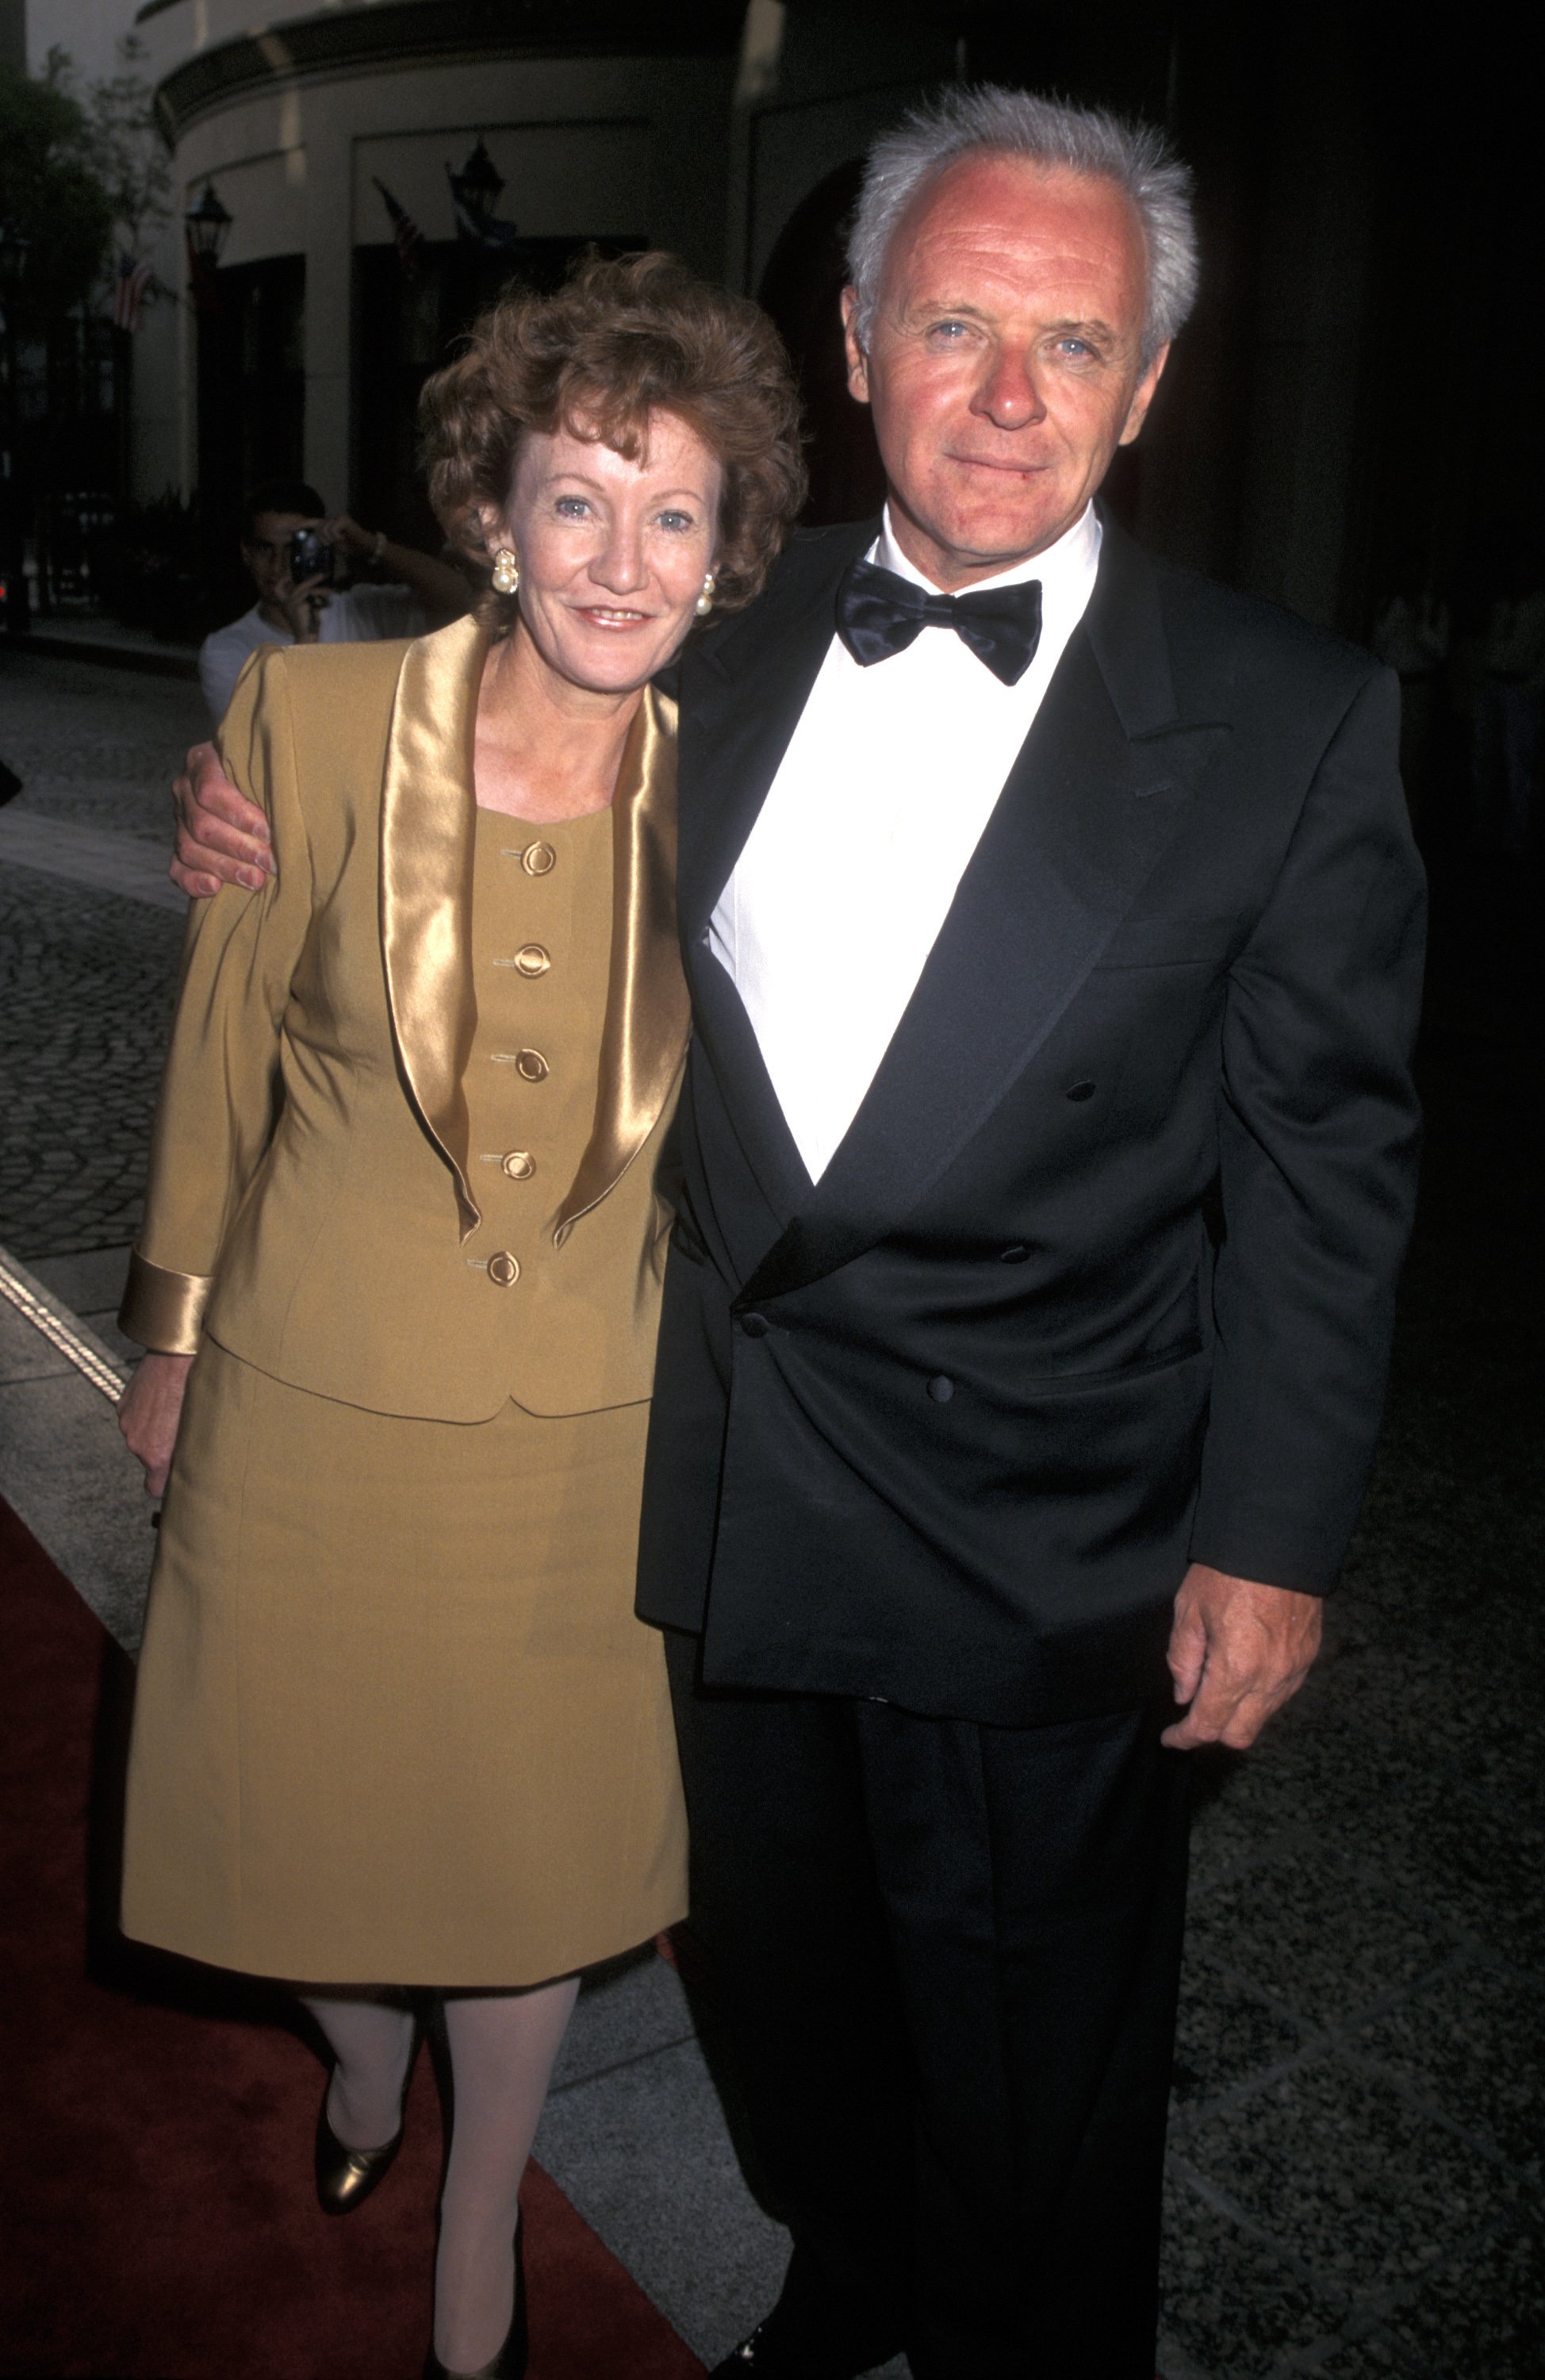 Jennifer Lynton and Anthony Hopkins during the 6th Annual BAFTA Awards at Beverly Wilshire Hotel in Beverly Hills, California. / Source: Getty Images